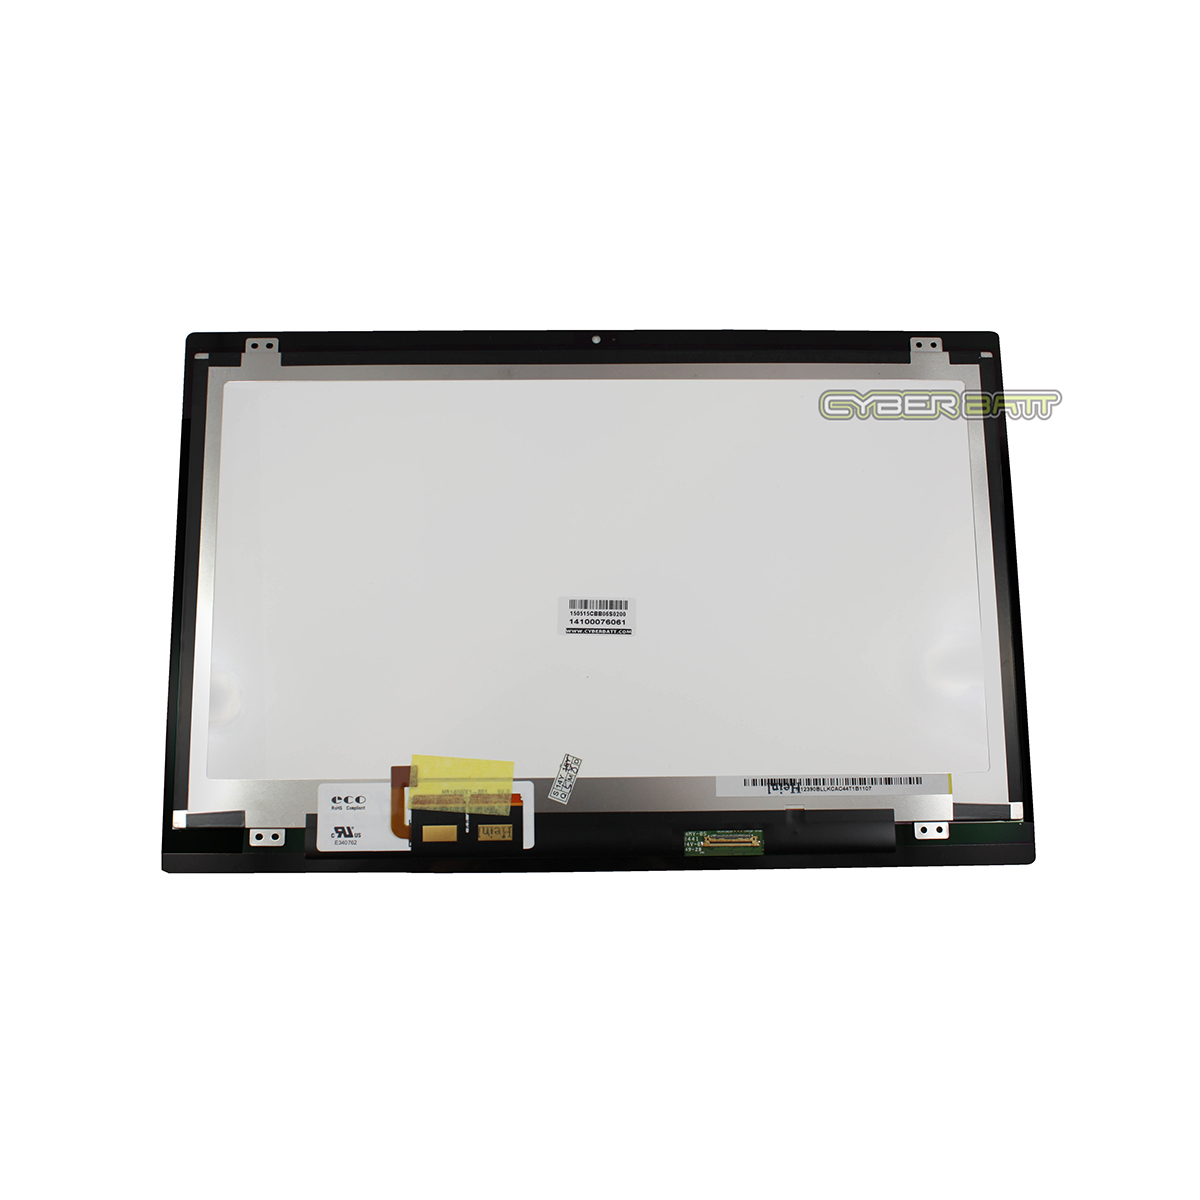 Display LED 14.0 Slim 30 pin HB140WX1-601 1366x768 +TouchScreen For Acer Aspire V5-471